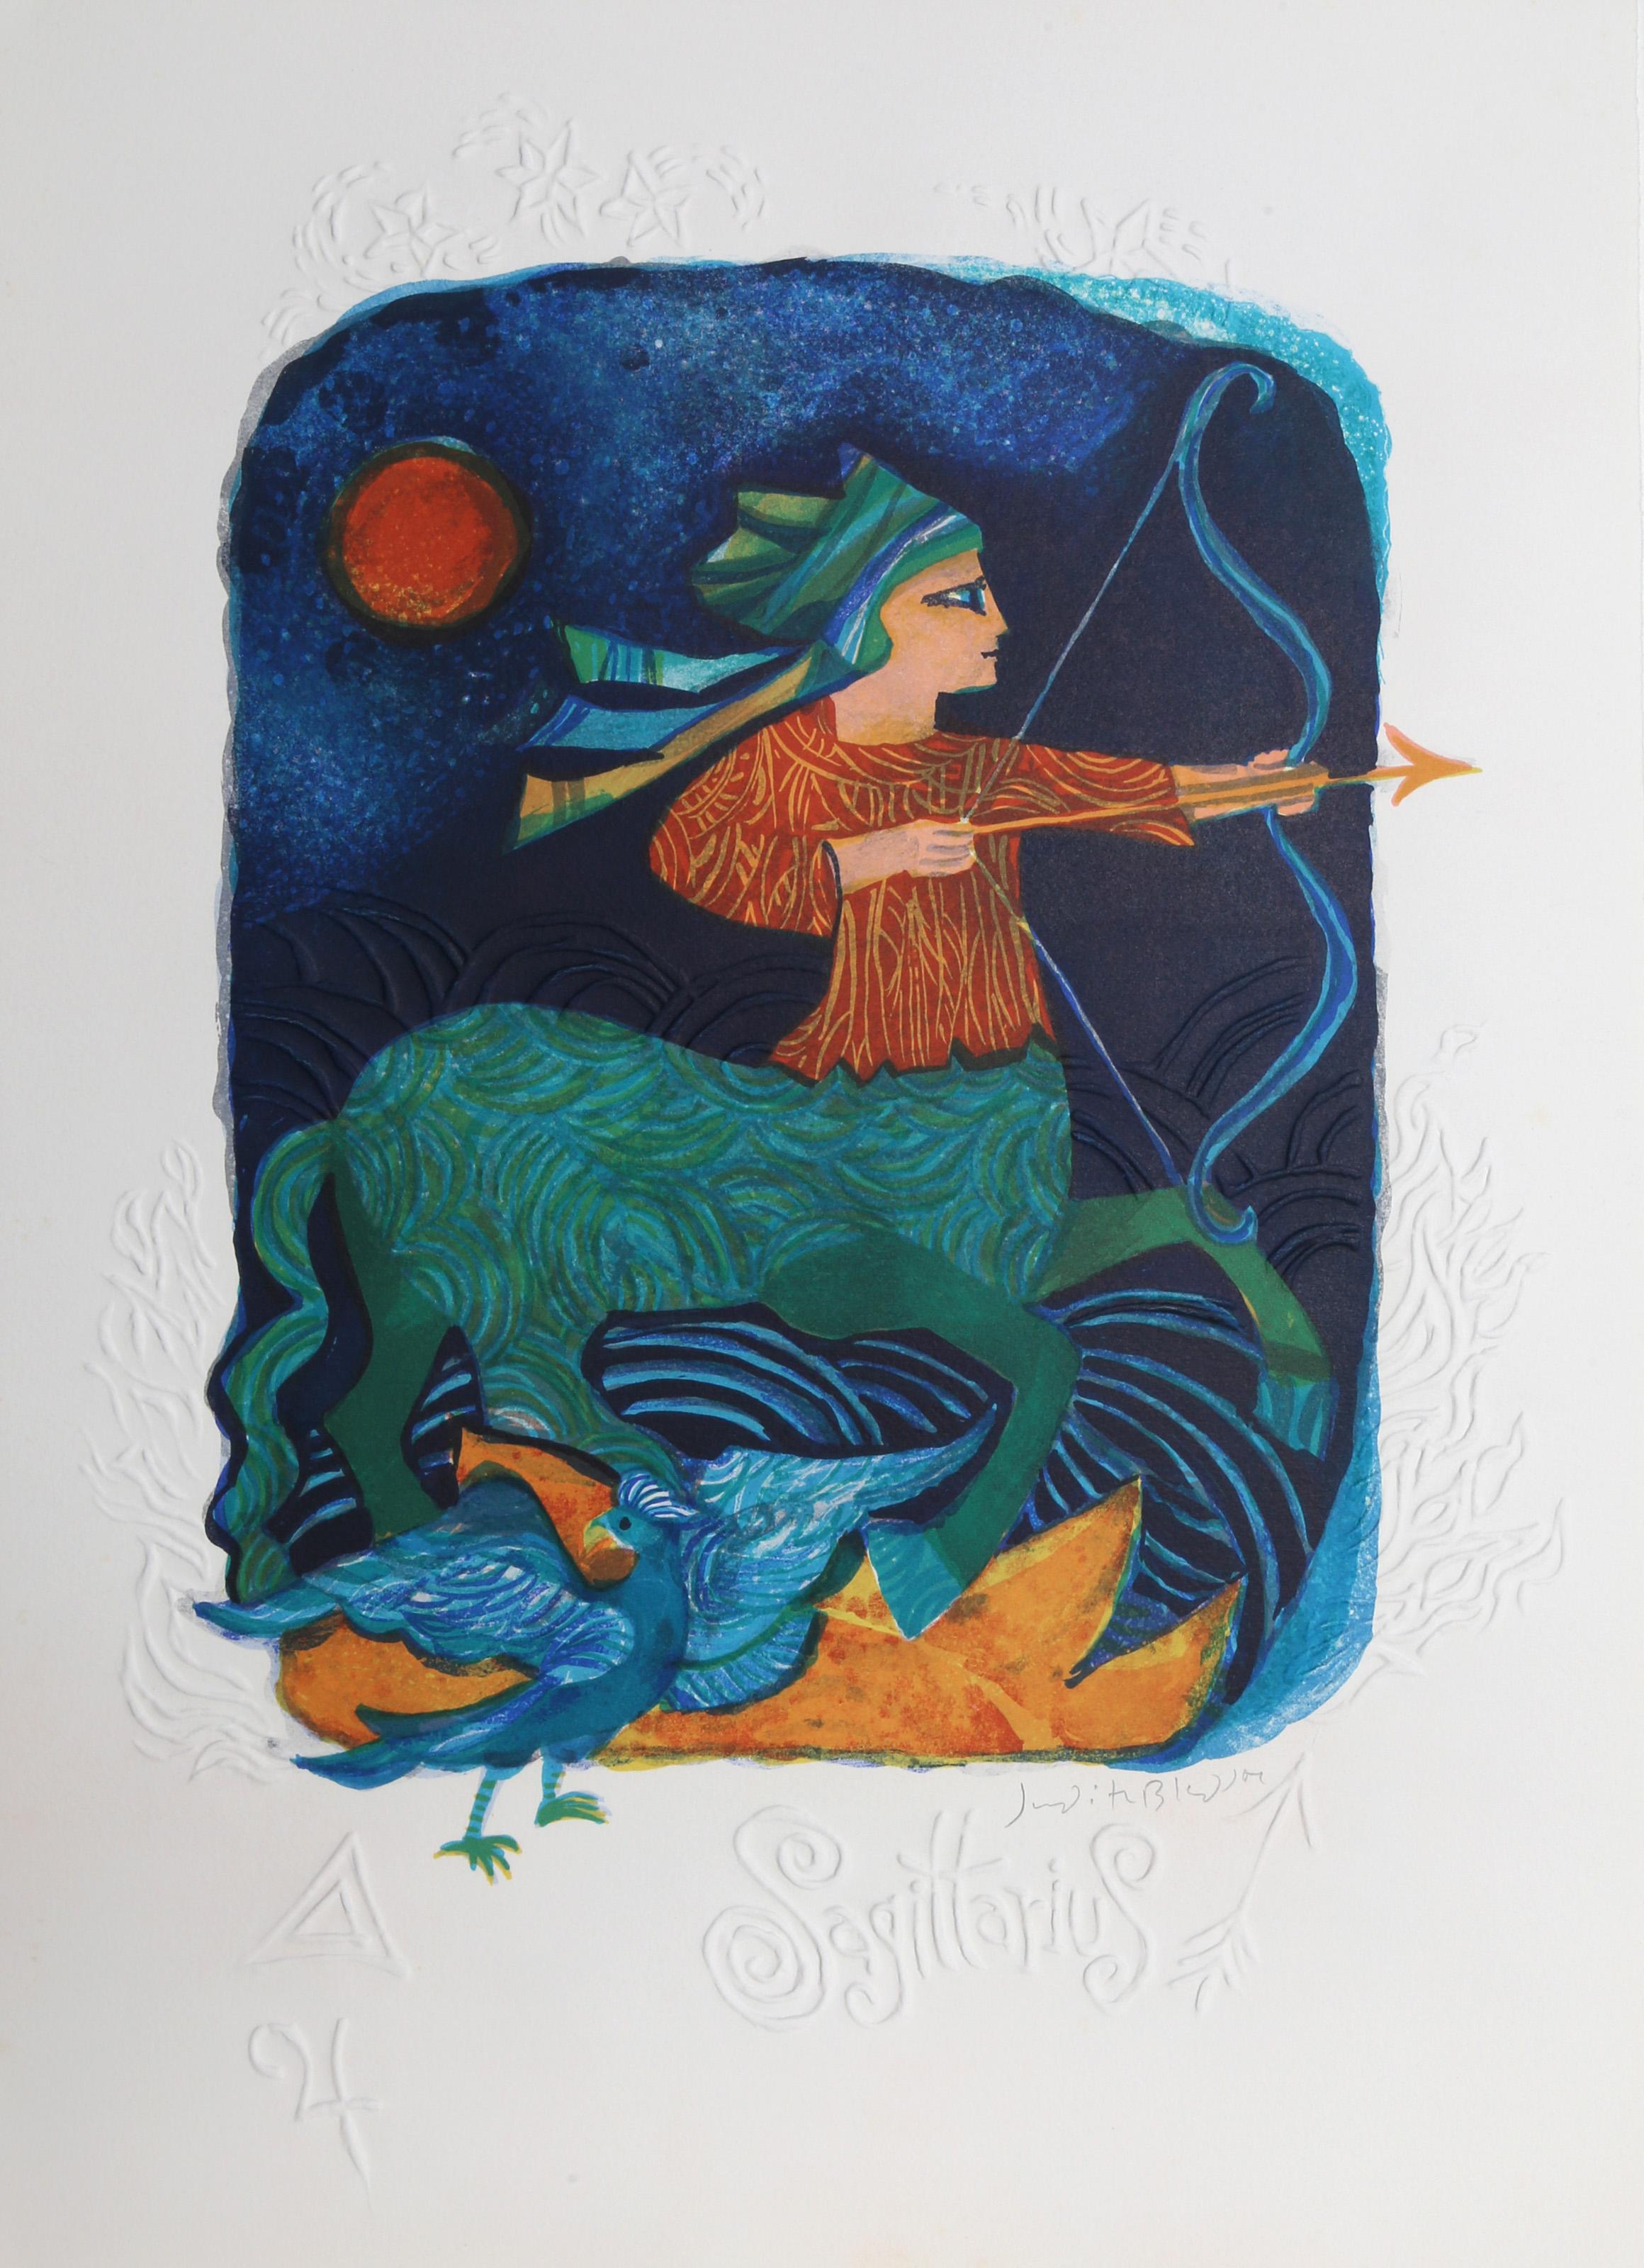 Judith Bledsoe, American (1938 - 2013) -  Sagittarius from the Zodiac of Dreams Series. Year: circa 1970, Medium: Lithograph with Embossing, signed in pencil, Edition: EA, Size: 21 x 14.5 in. (53.34 x 36.83 cm), Description: Preparing to shoot while